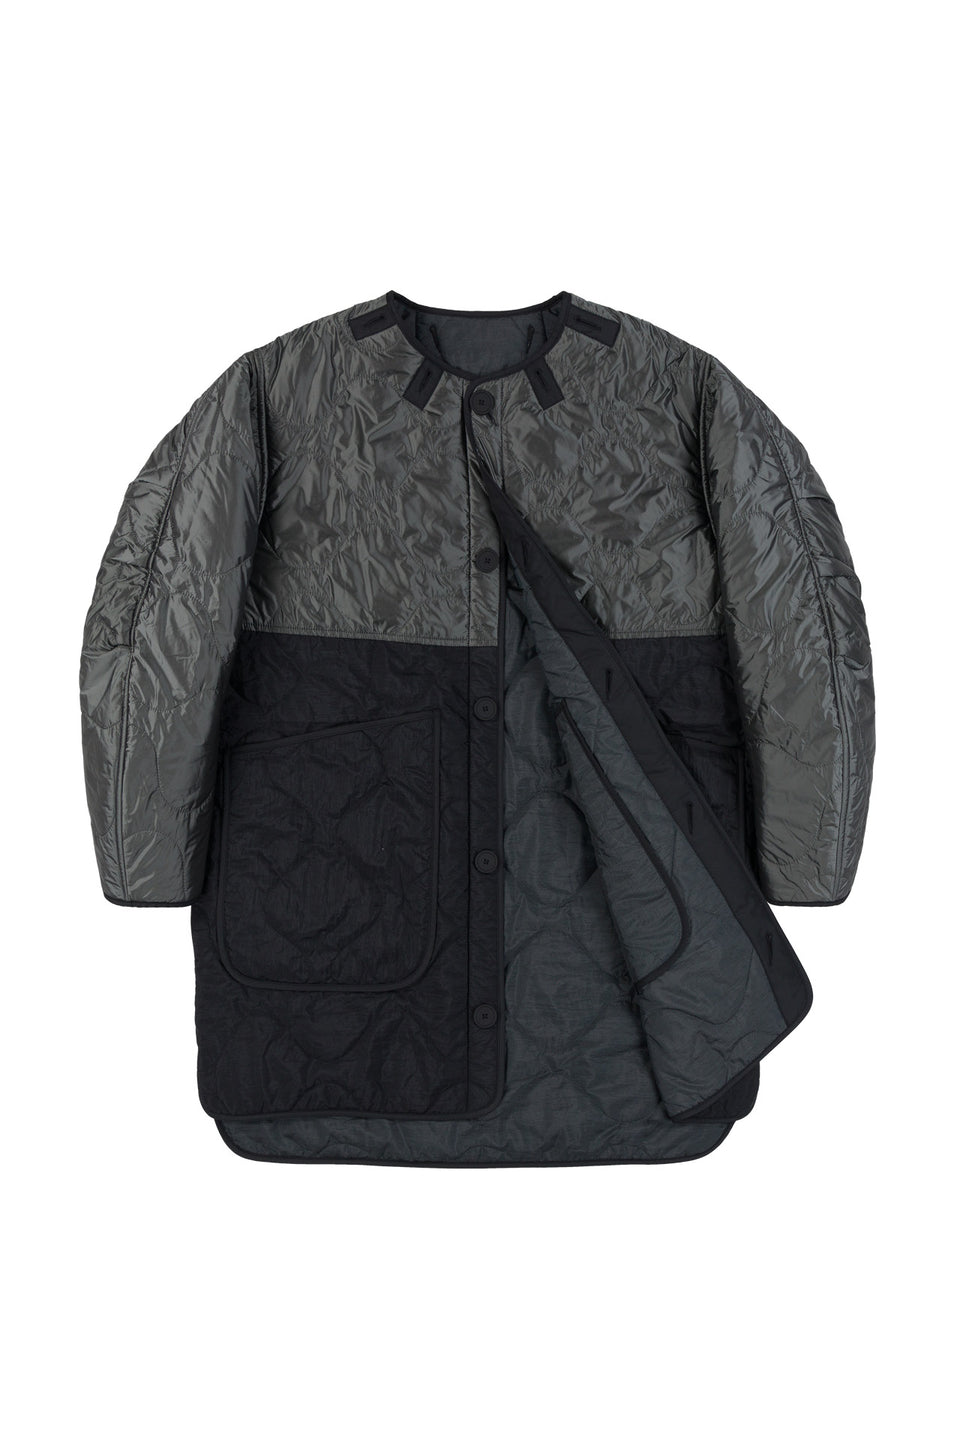 Colourblock Quilt Jacket - Anthracite / Slate (listing page thumbnail)